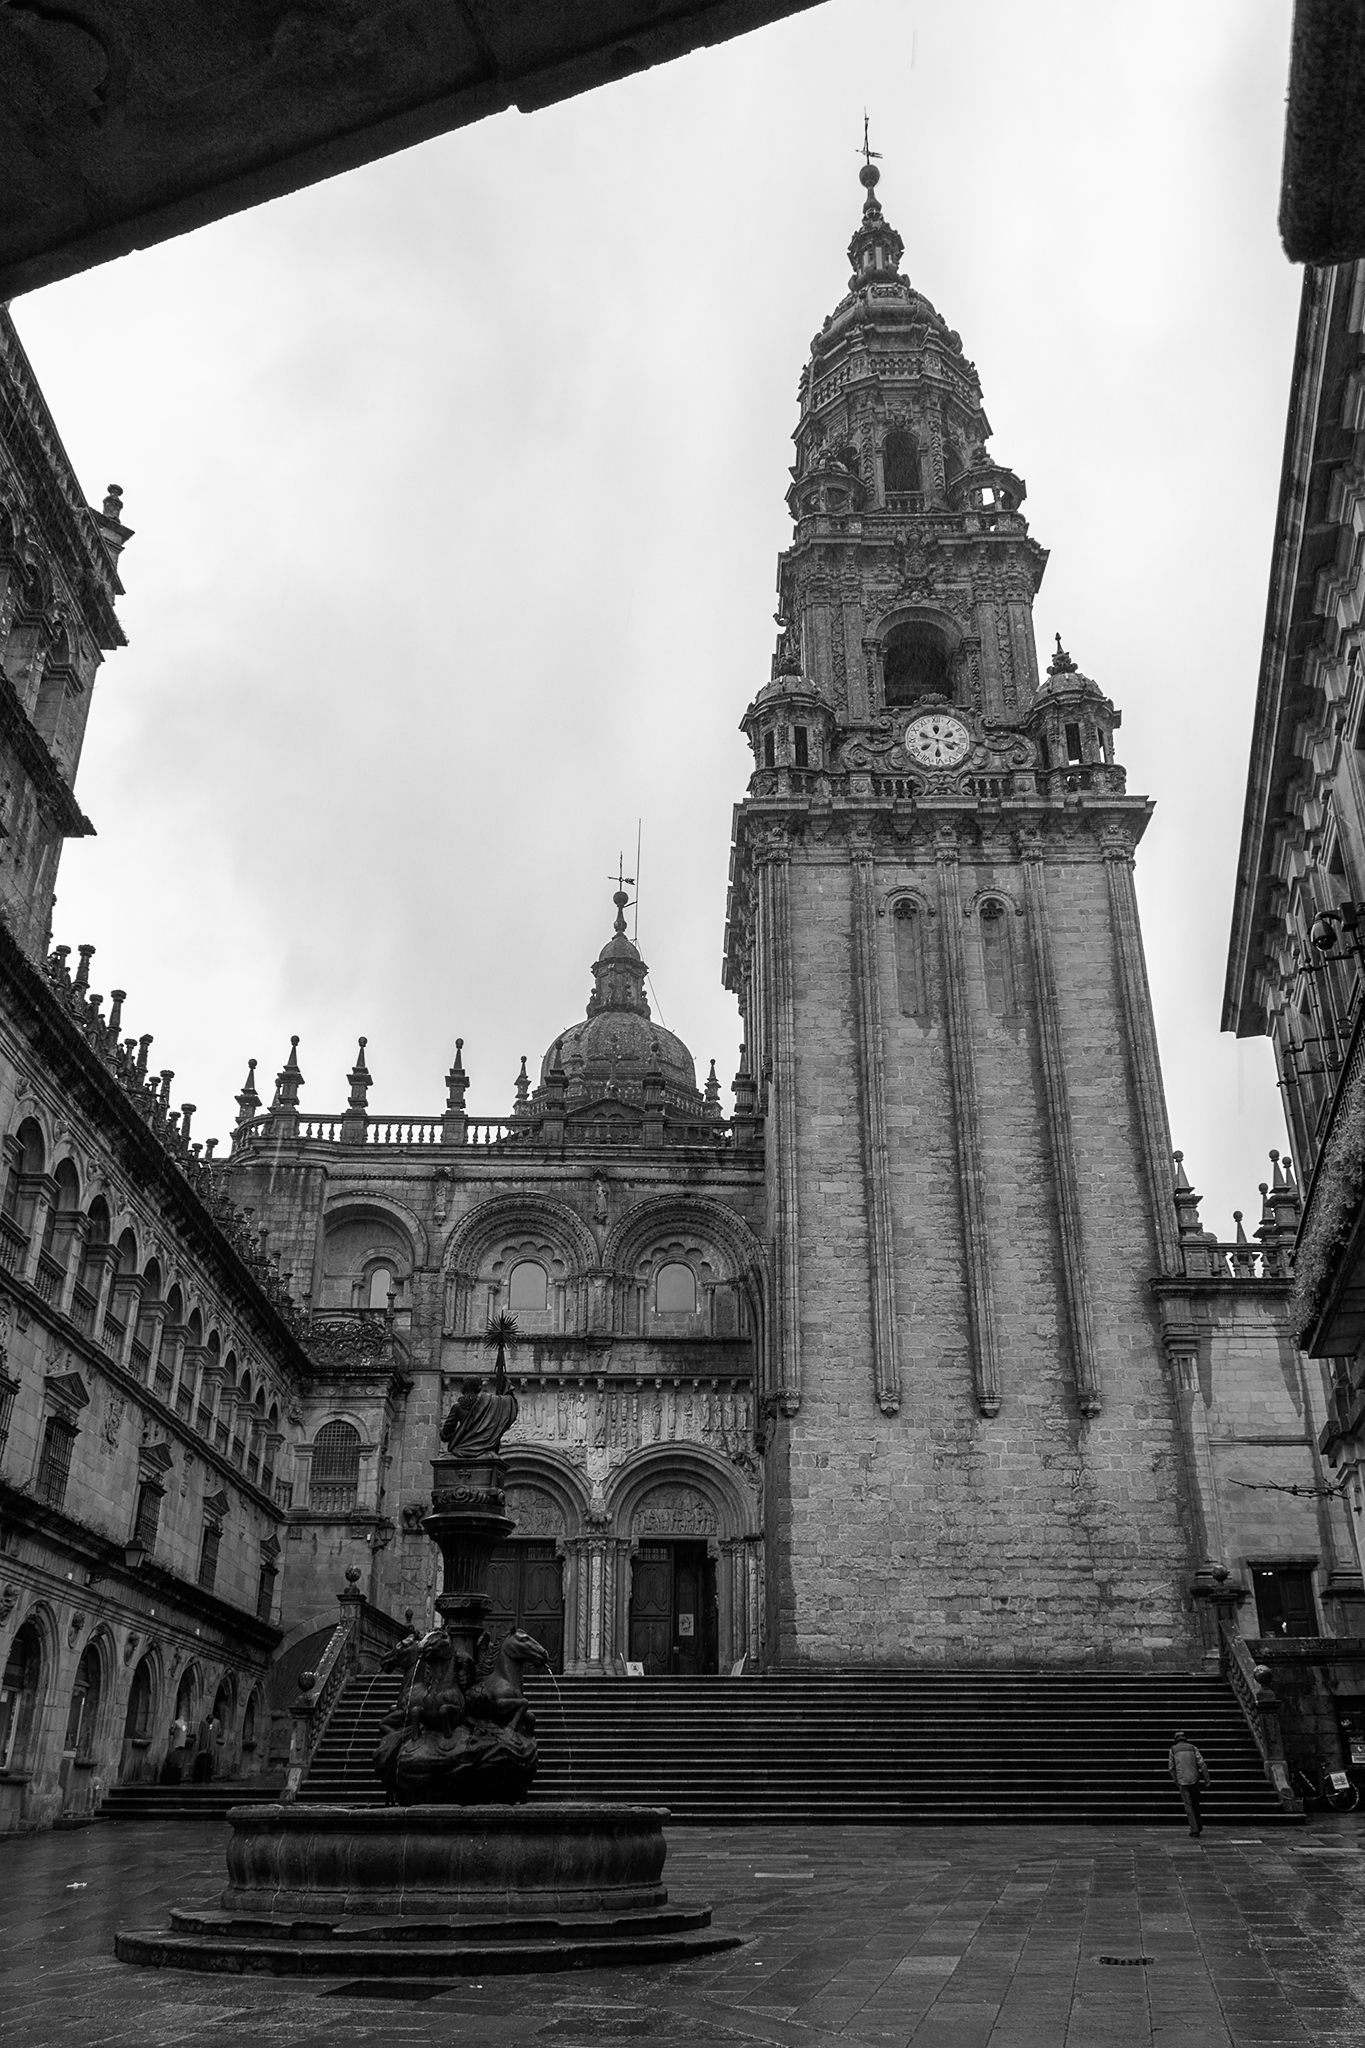 As is common in the squares and small streets that surround the Cathedral of Compostela, Platerías Square receives its name from the ancient trades and artisan activities that were developed historically.</br></br>Both the Plaza de Platerías and the north facade of the basilica are named after the workshops of goldsmiths and silversmiths that were located in this area during the Middle Ages, a custom that is maintained until the current era in which many establishments of jewelry and more specifically of artisan silversmiths are still preserved.</br></br>In the center of the square we find the Fountain of the Horses, which was originally located inside the cloister of the Cathedral, and on the right, more than 70 meters high, you can see the Clock Tower, with its lower gothic part and with later additions in baroque style on the upper part.